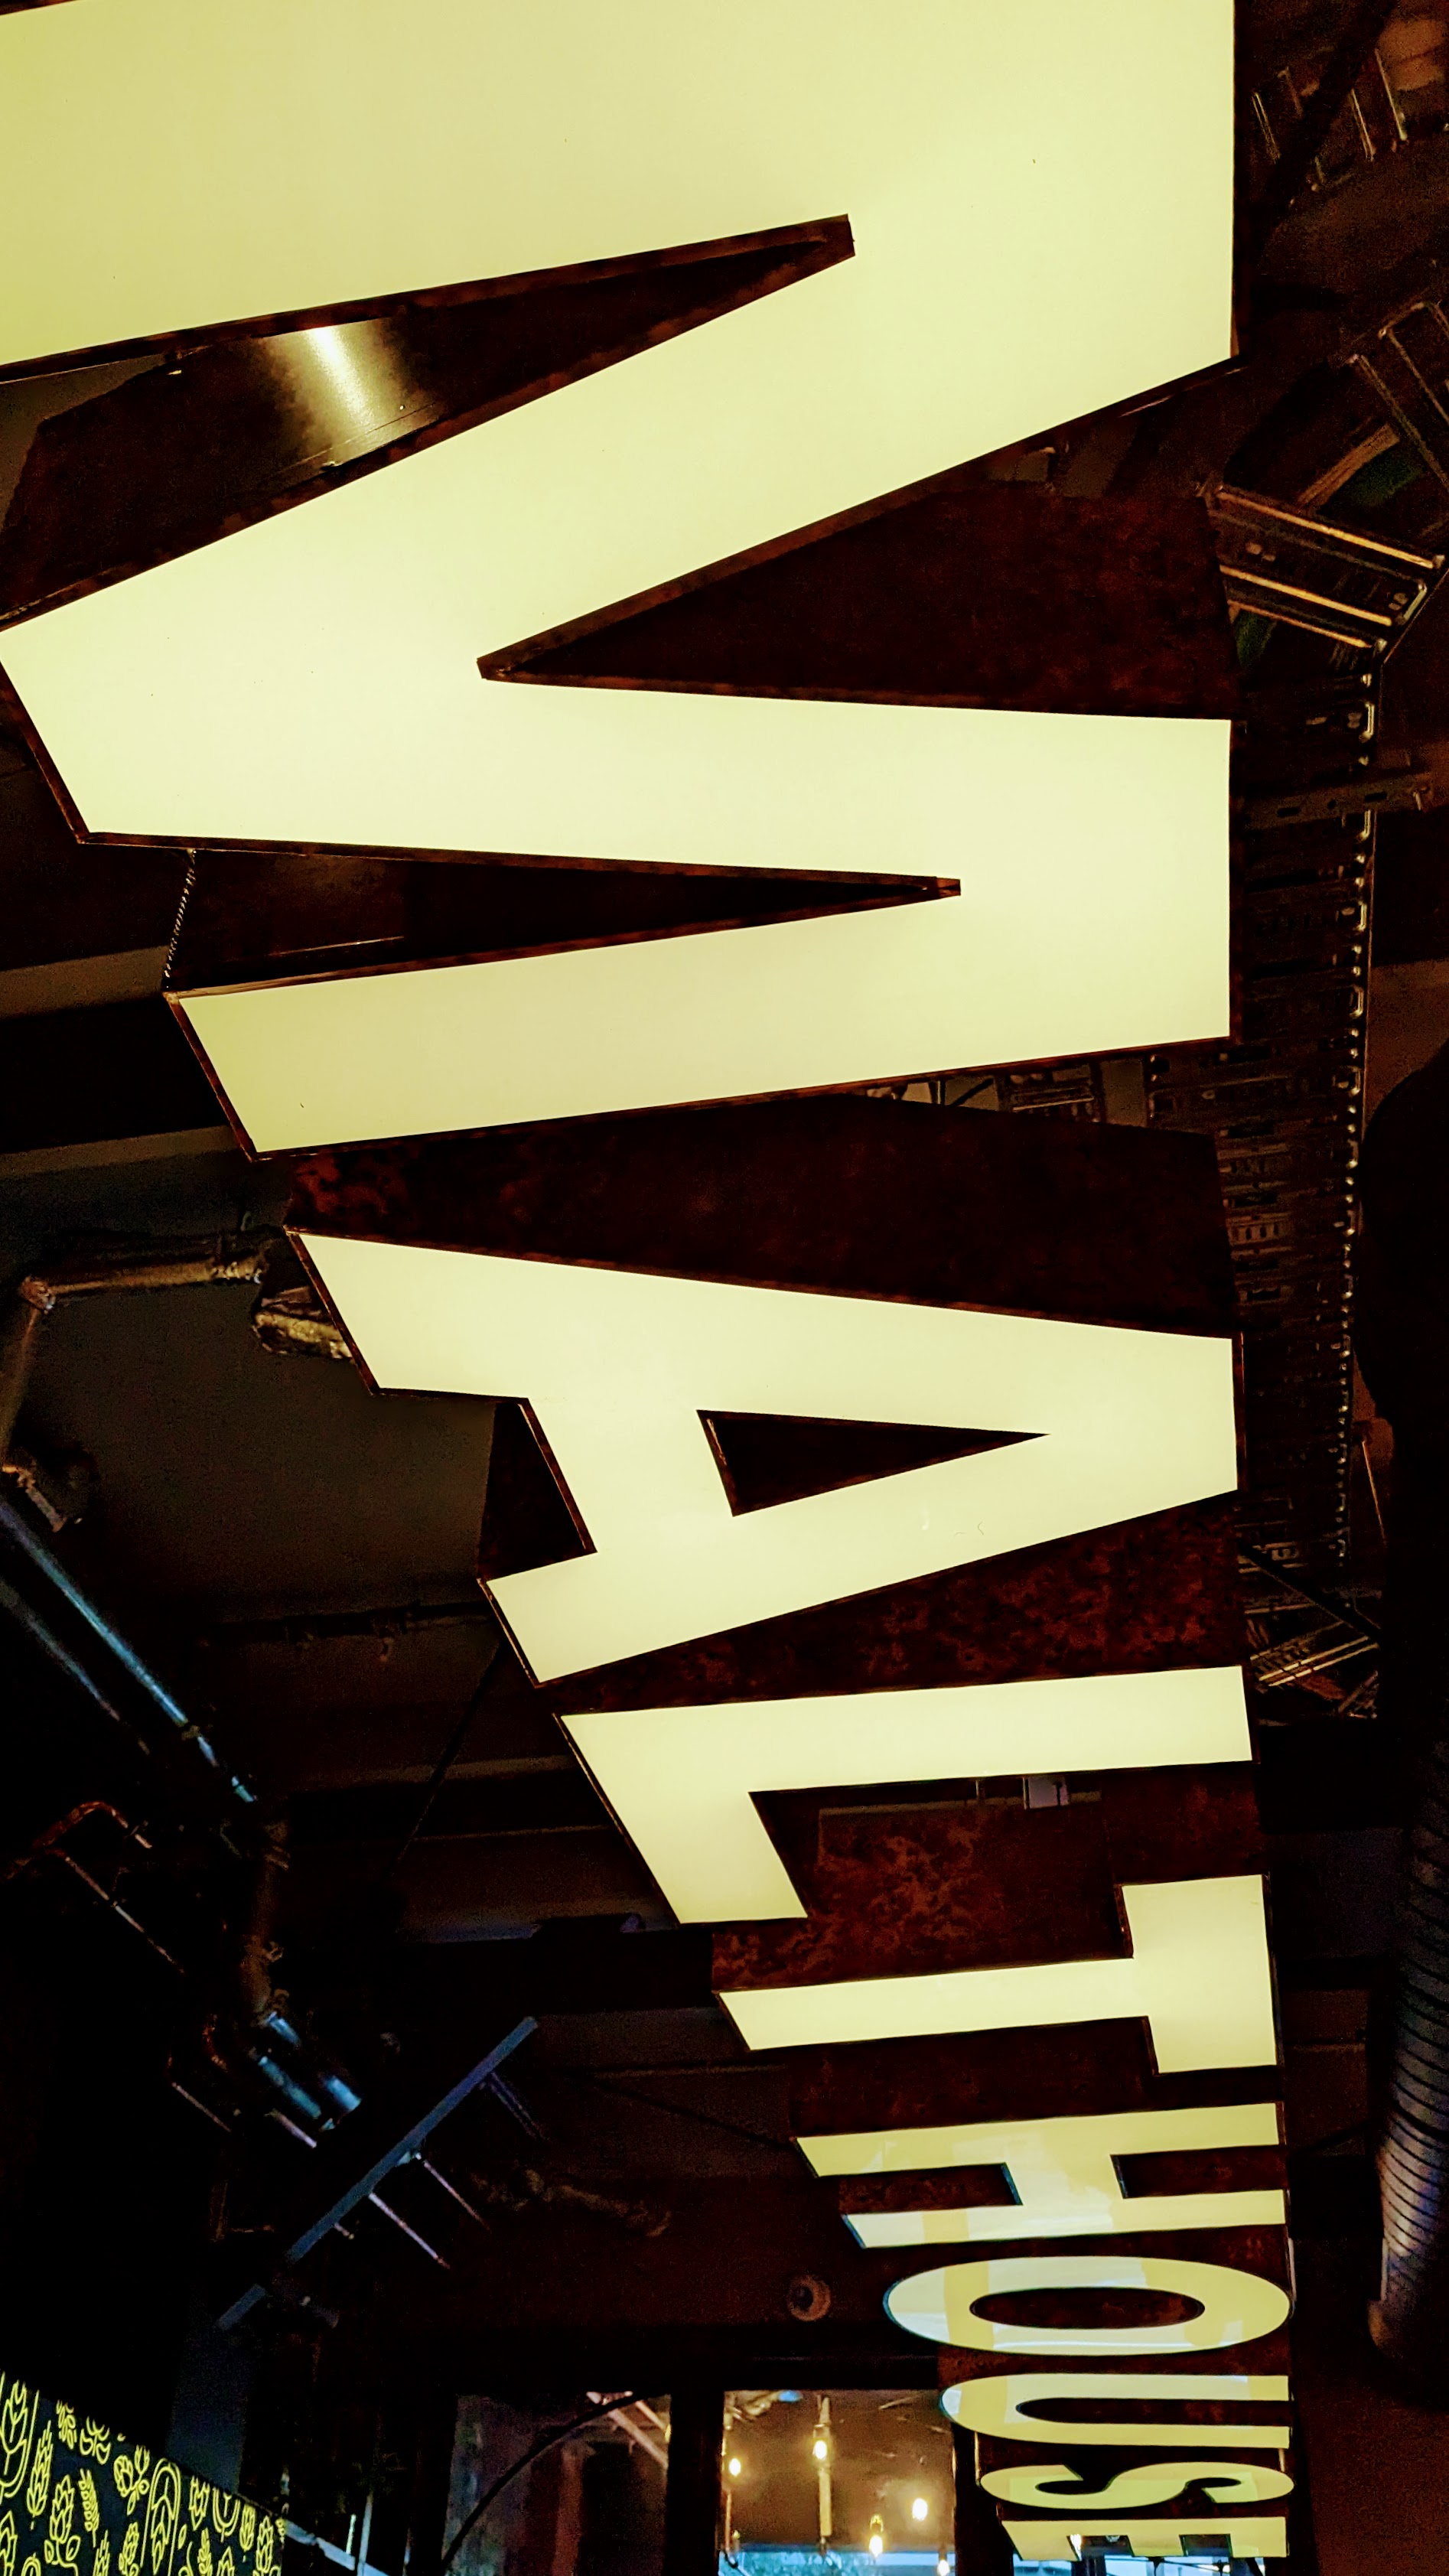 Very large, yellow, cut out letters of 'Malthouse' on the dark ceiling